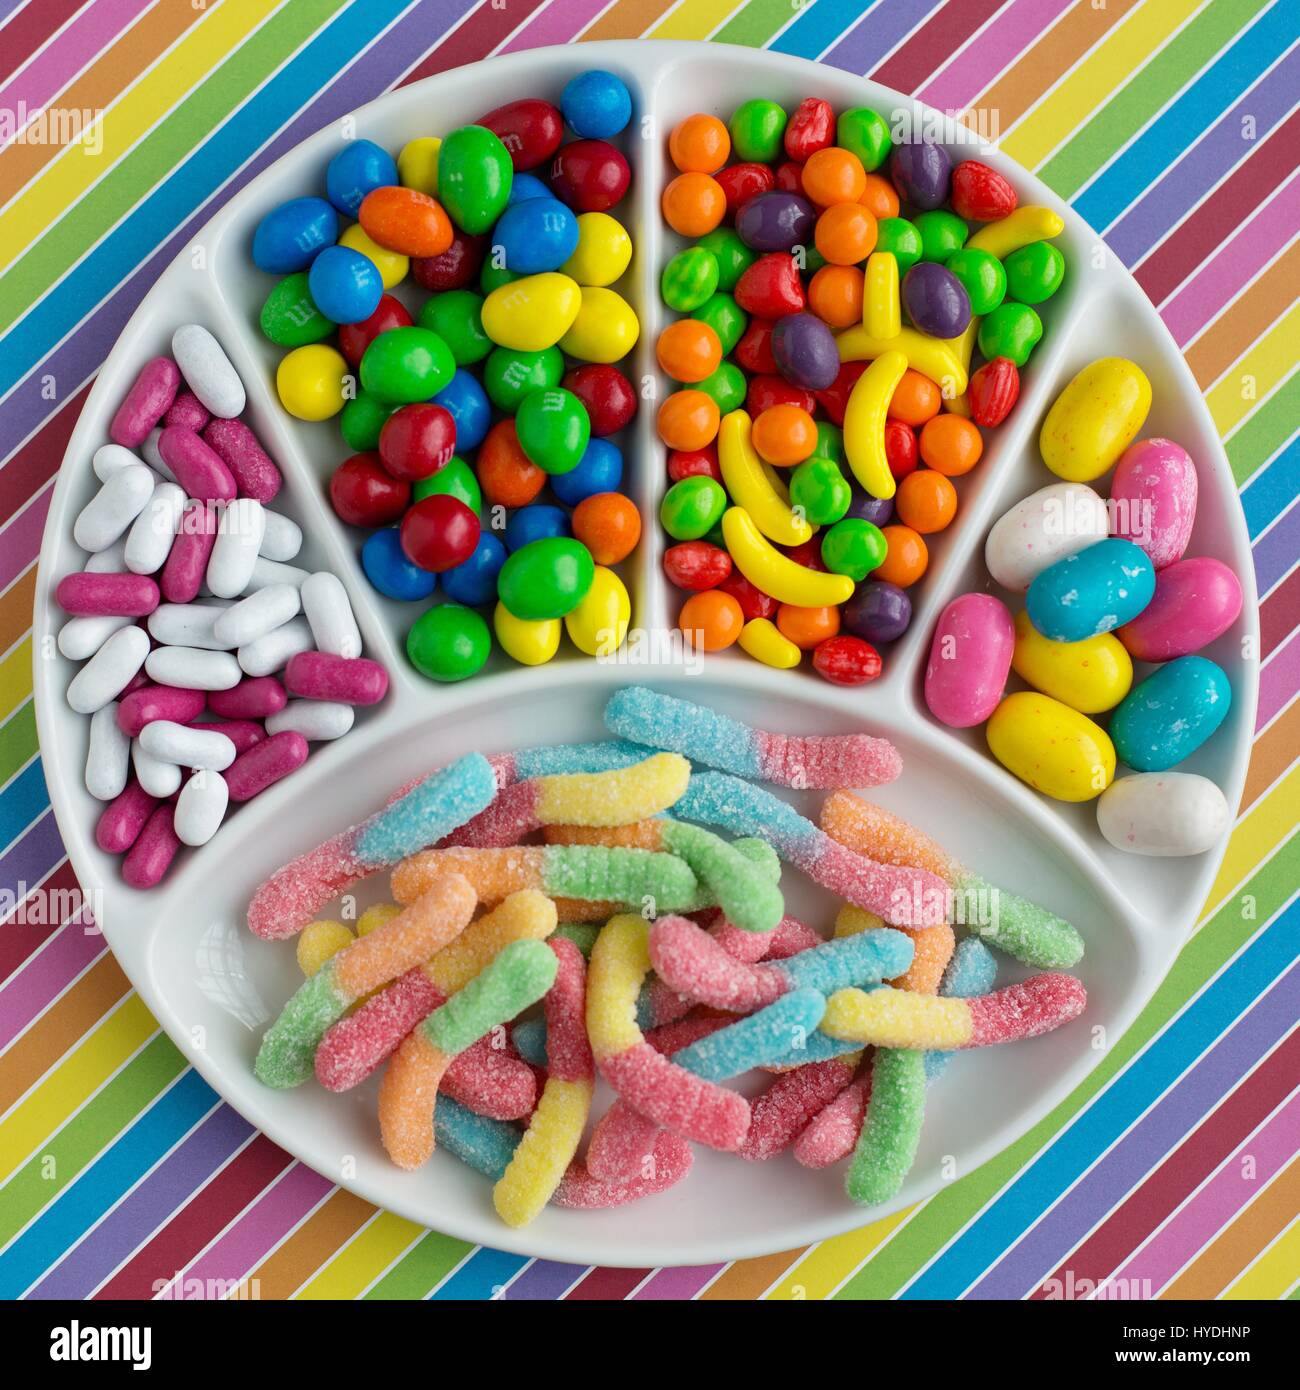 A variety of candies on a plate. Stock Photo